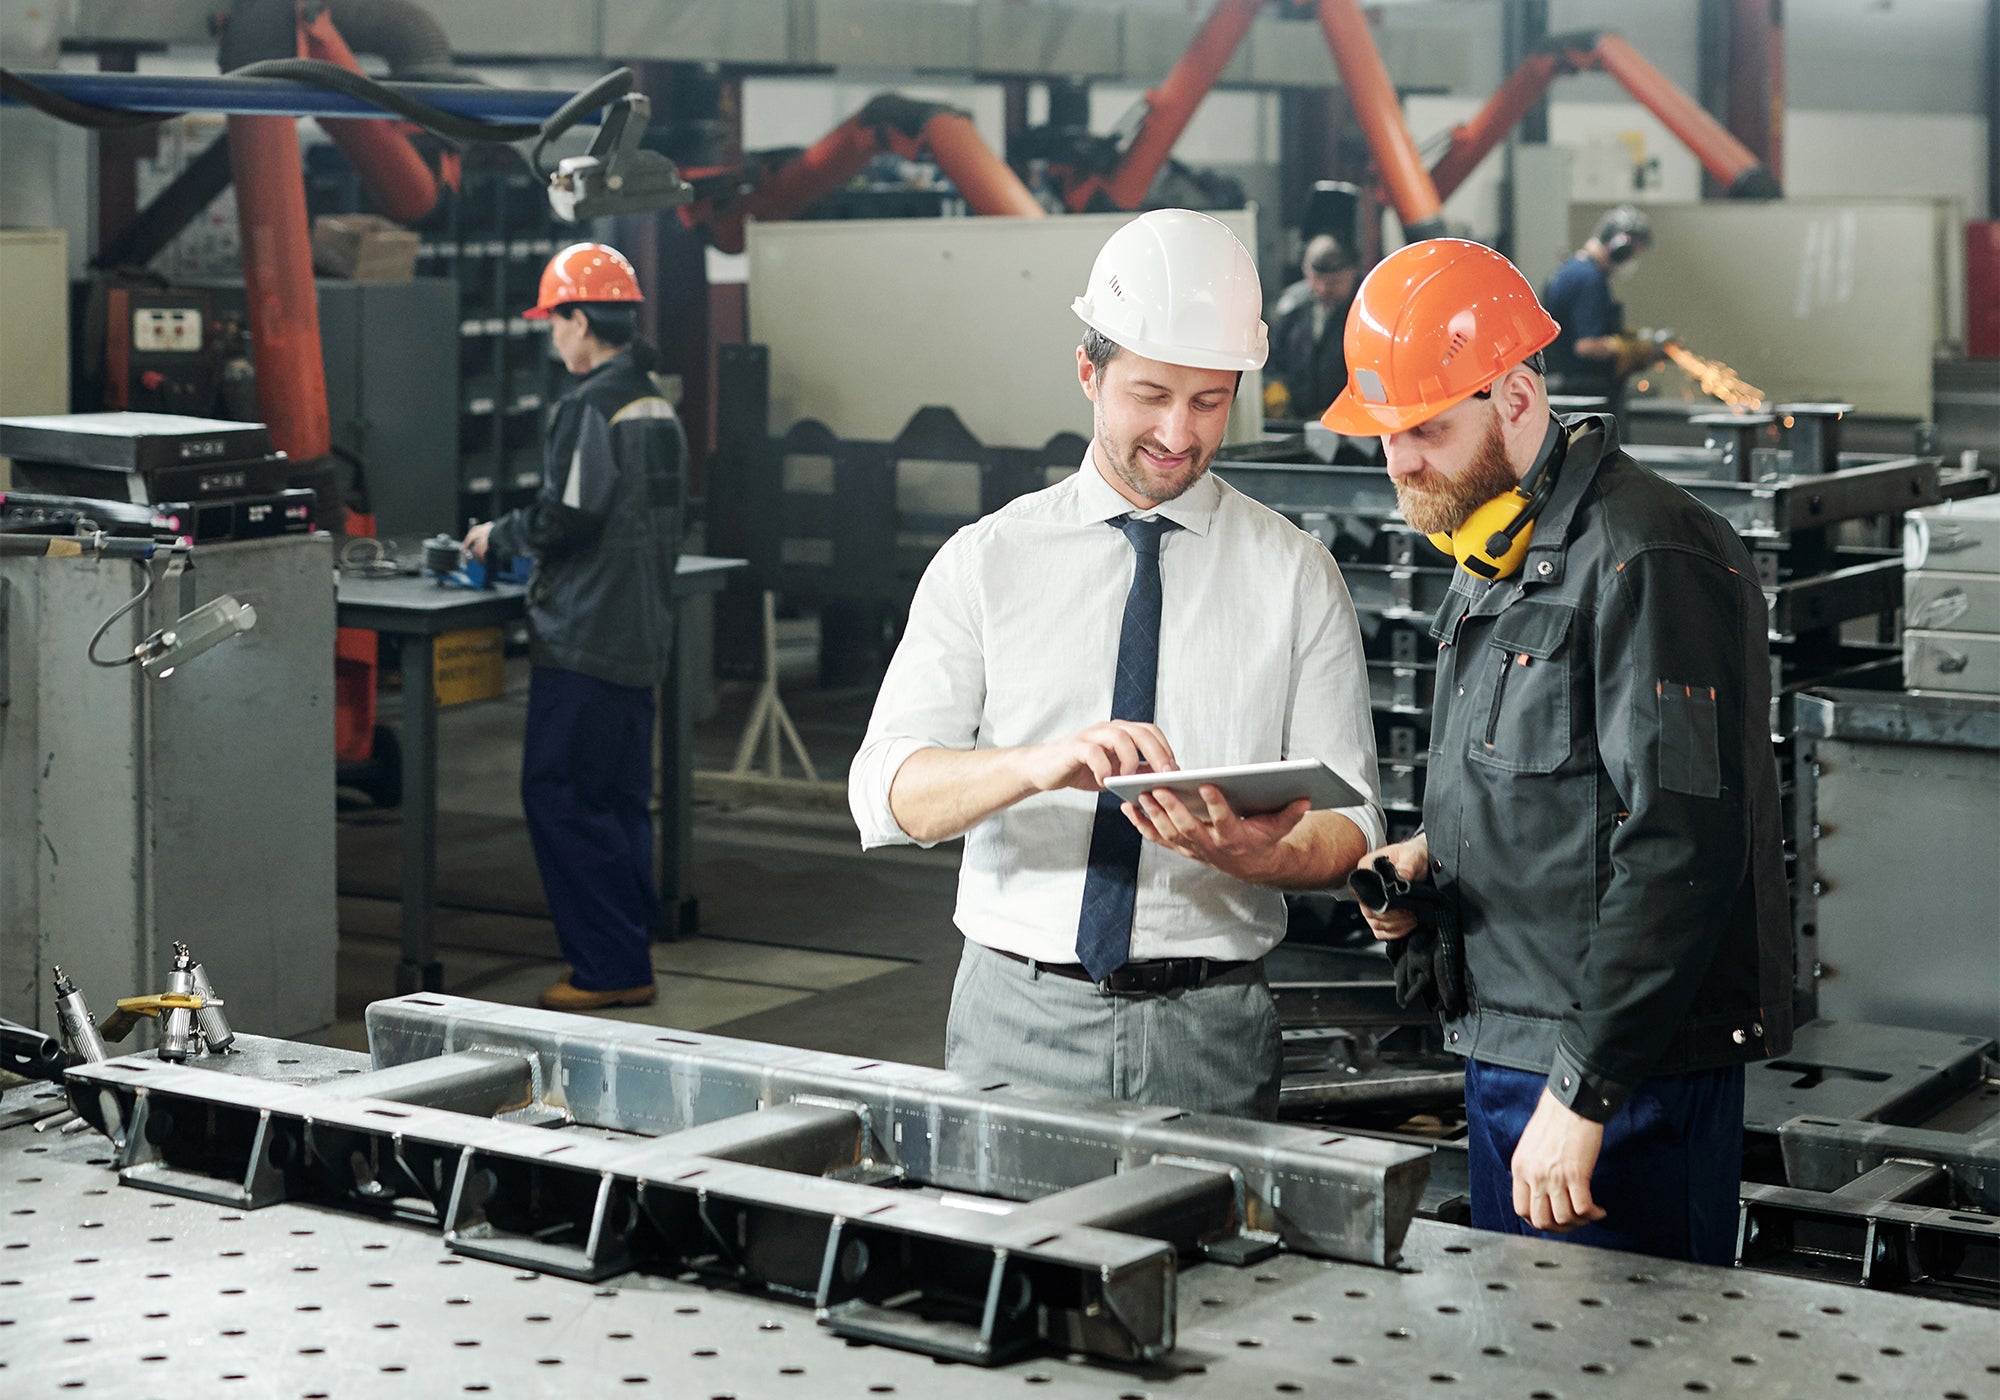 Two men in hard hats stand next to each other in a factory. On the table in front of them, there is a piece of metal equipment. In the background, there is another man with a hard hat.